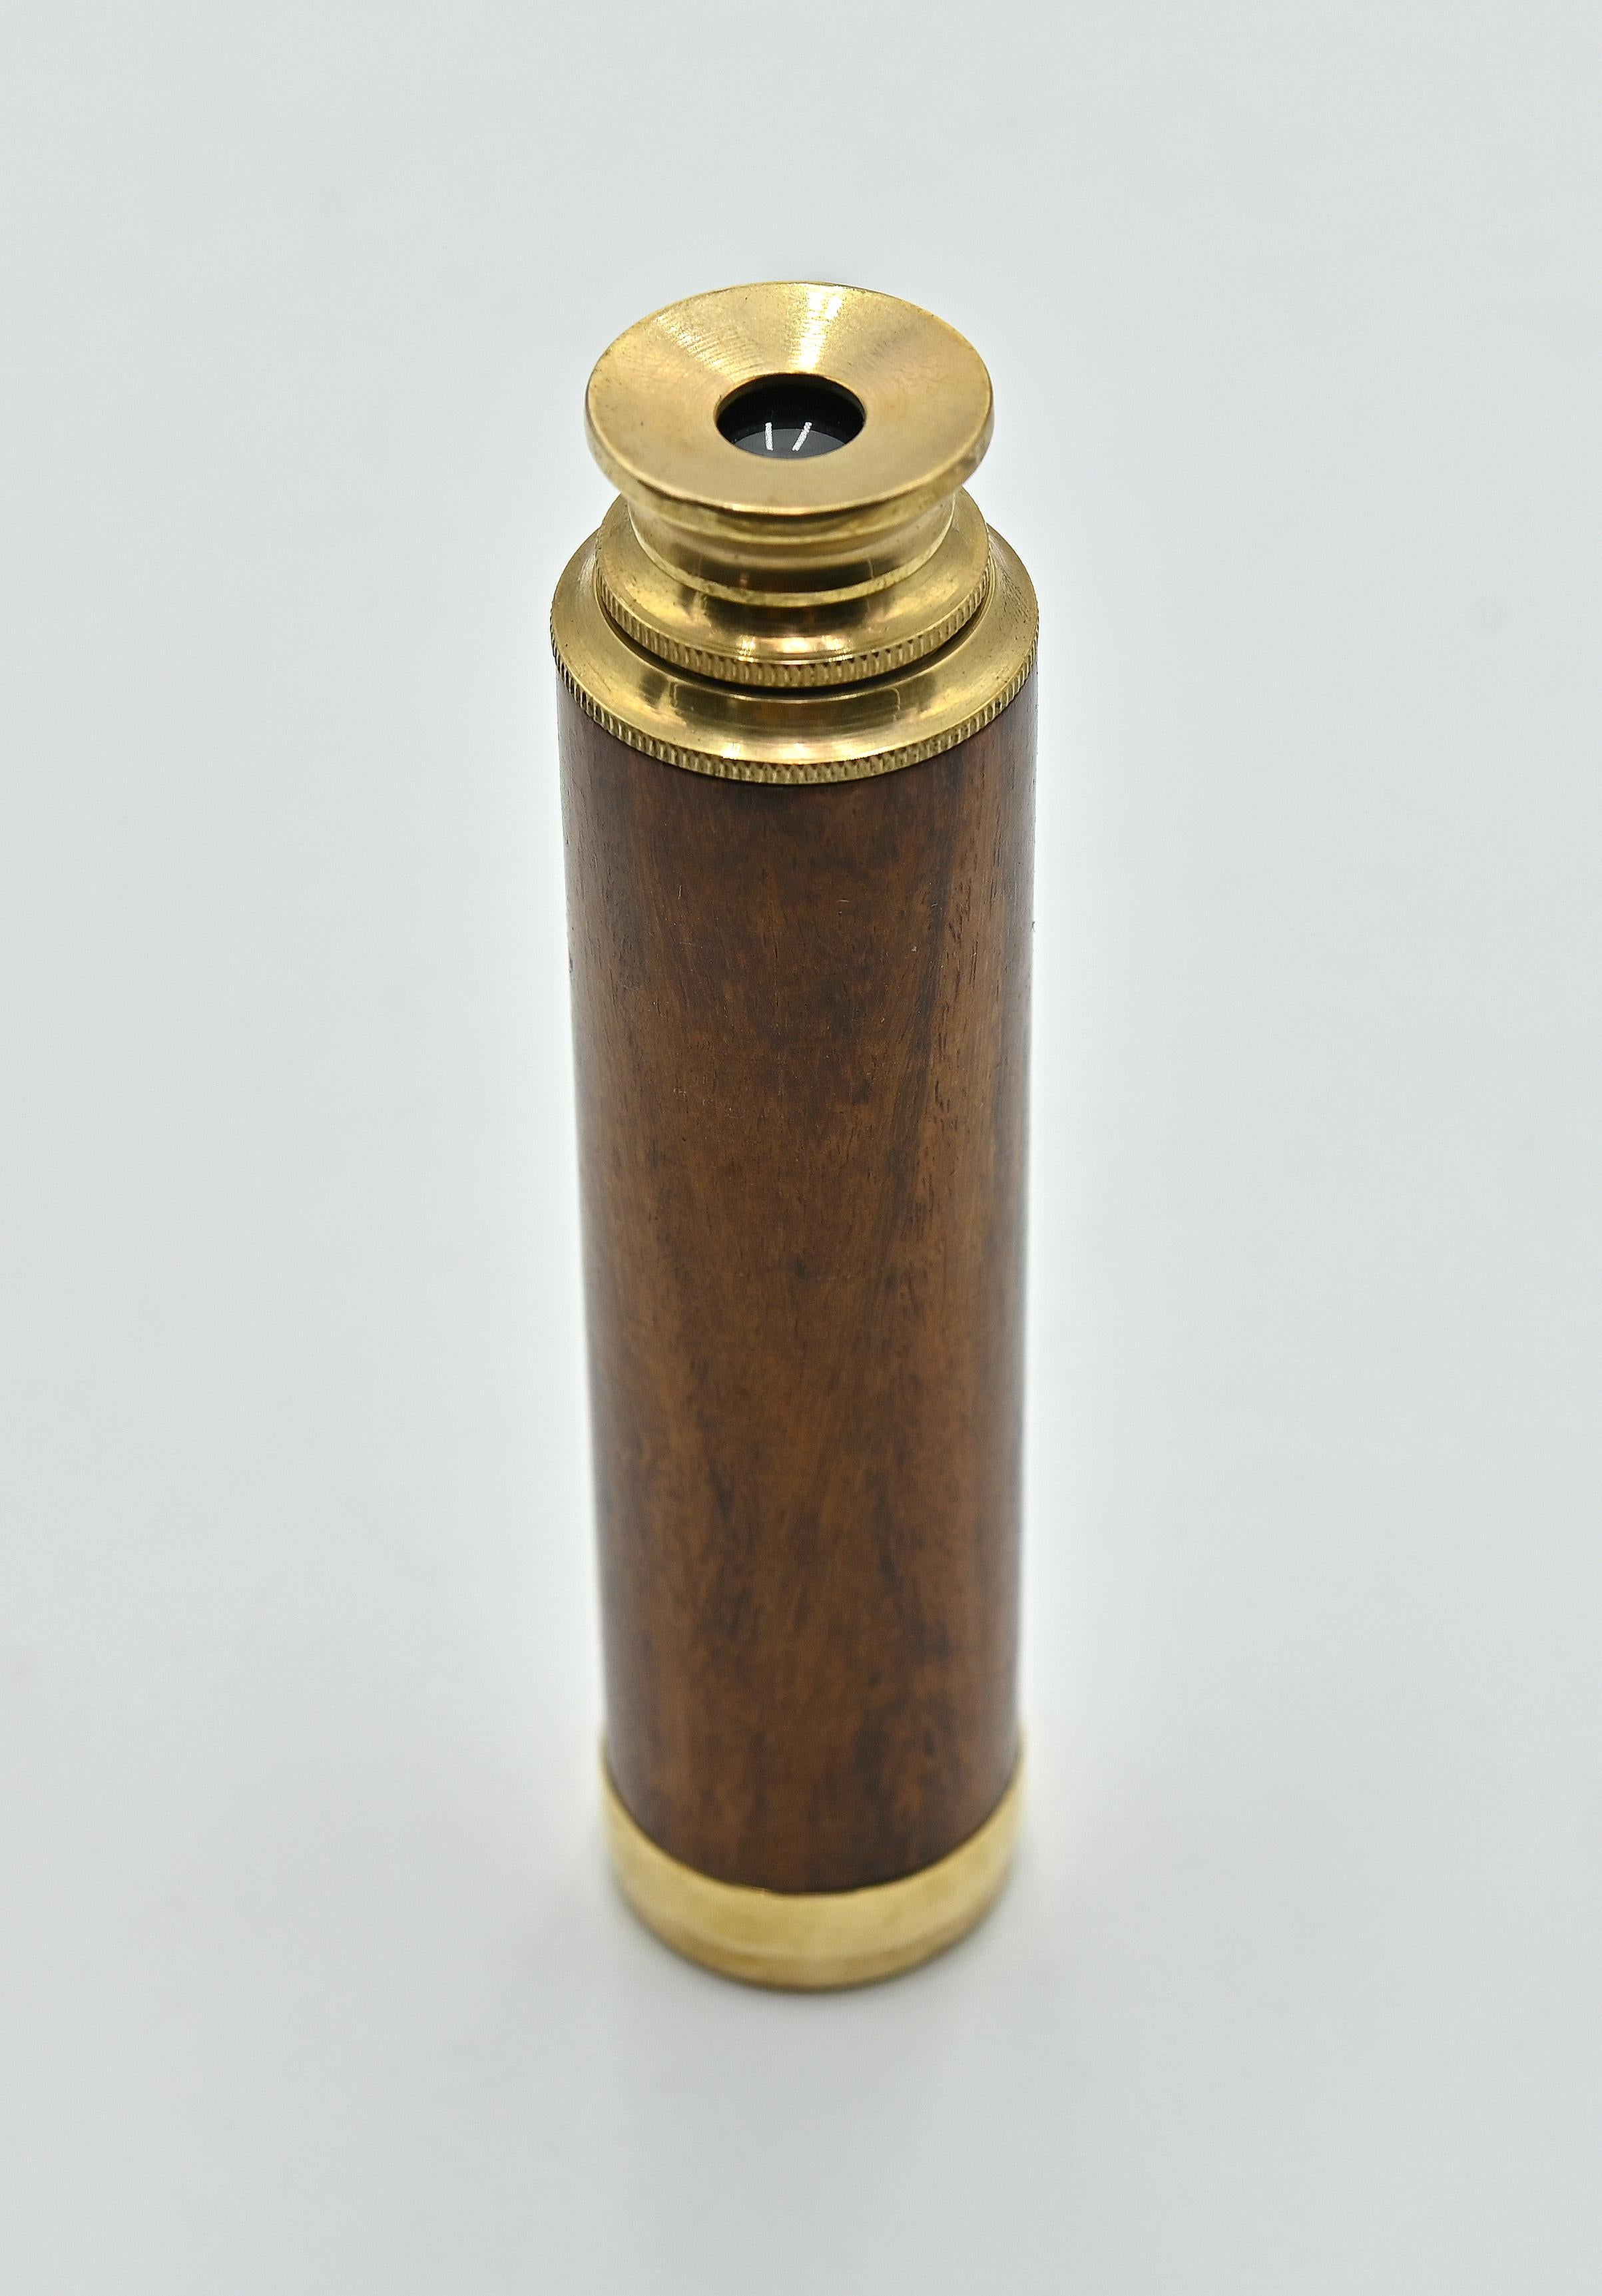 Vintage Telescope is a scientific object realized in the early 20th Century.

A bronze telescope with glass lenses and wooden grip, close up.

Don't miss this vintage object!